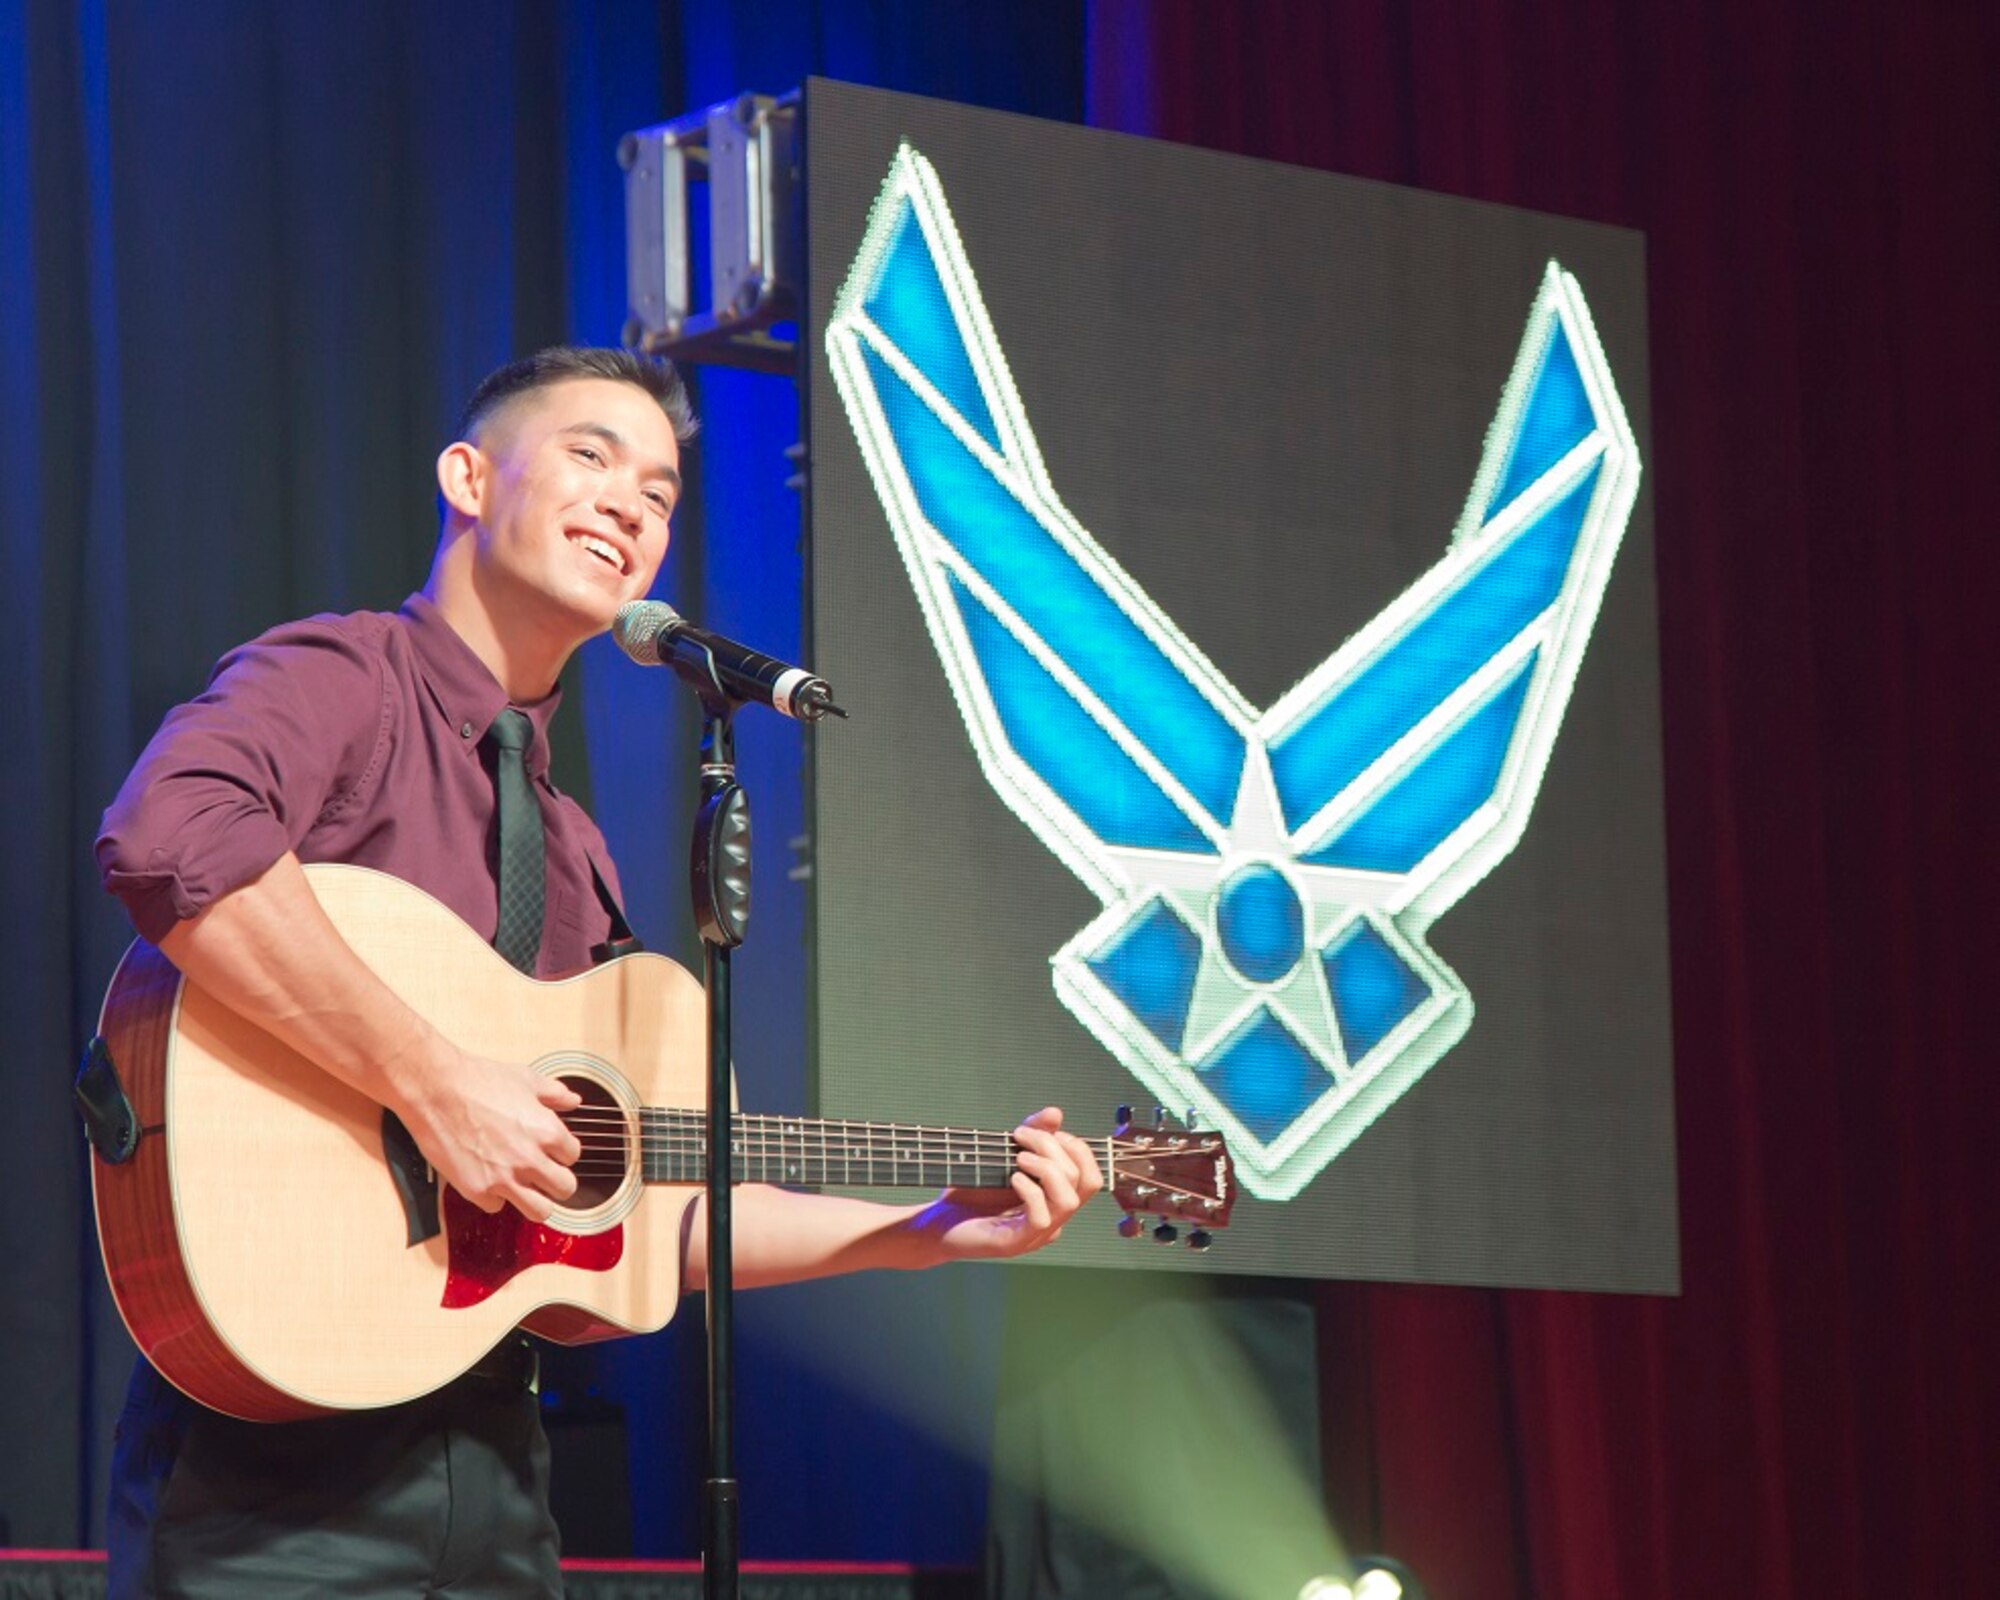 Senior Airman James Pratt of the 28th Civil Engineer Squadron at Ellsworth Air Force Base, South Dakota, won the Air Force Worldwide Talent Competition. (U.S. Air Force Photo by Lee Schwabe)